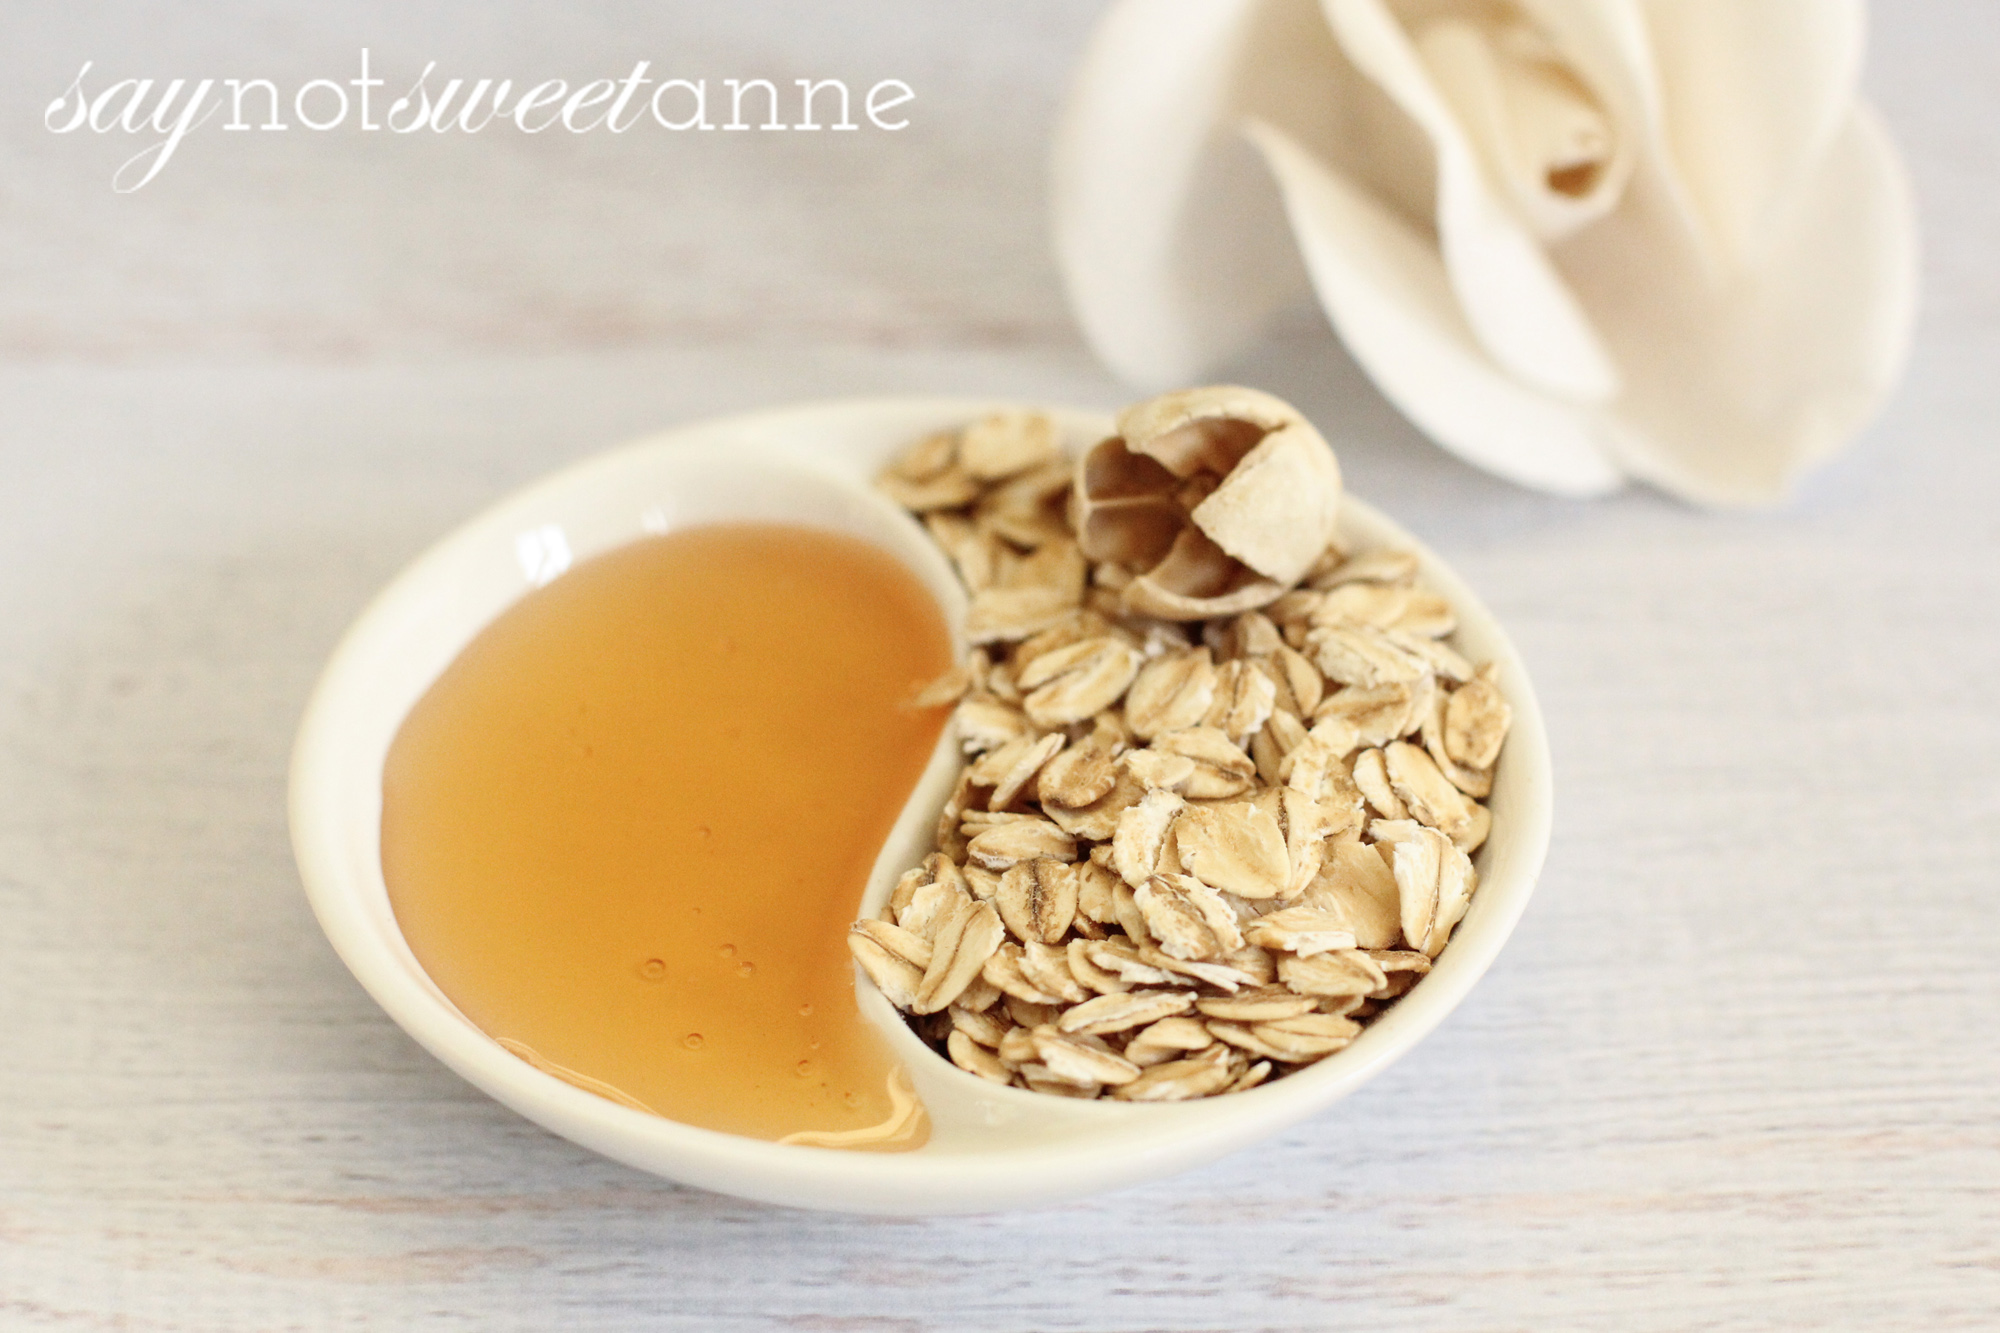 Natural Pore Shrinking Mask with honey and oatmeal. Gentle, easy and affordable DIY mask for healthy and better looking skin! | saynotsweetanne.com